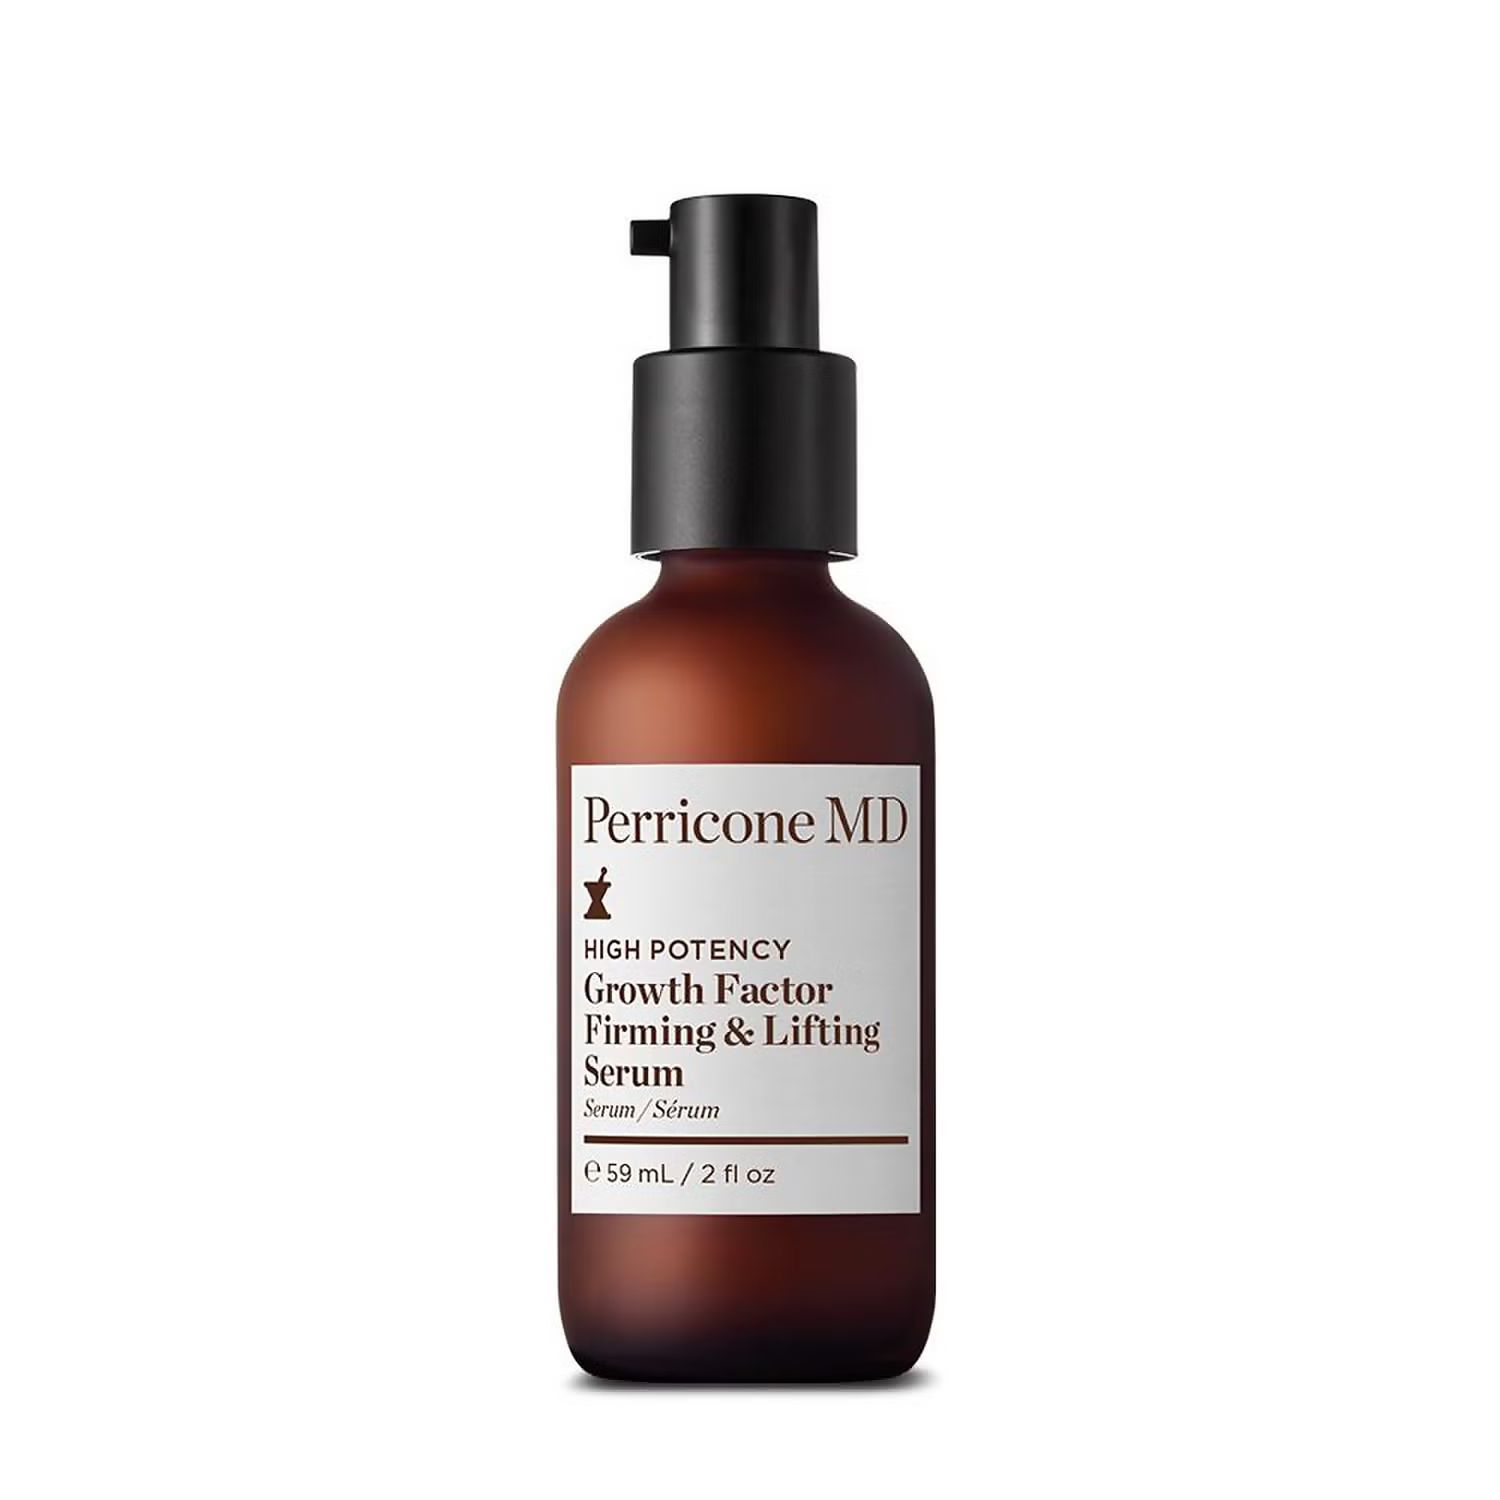 High Potency Growth Factor Firming & Lifting Serum | PerriconeMD US